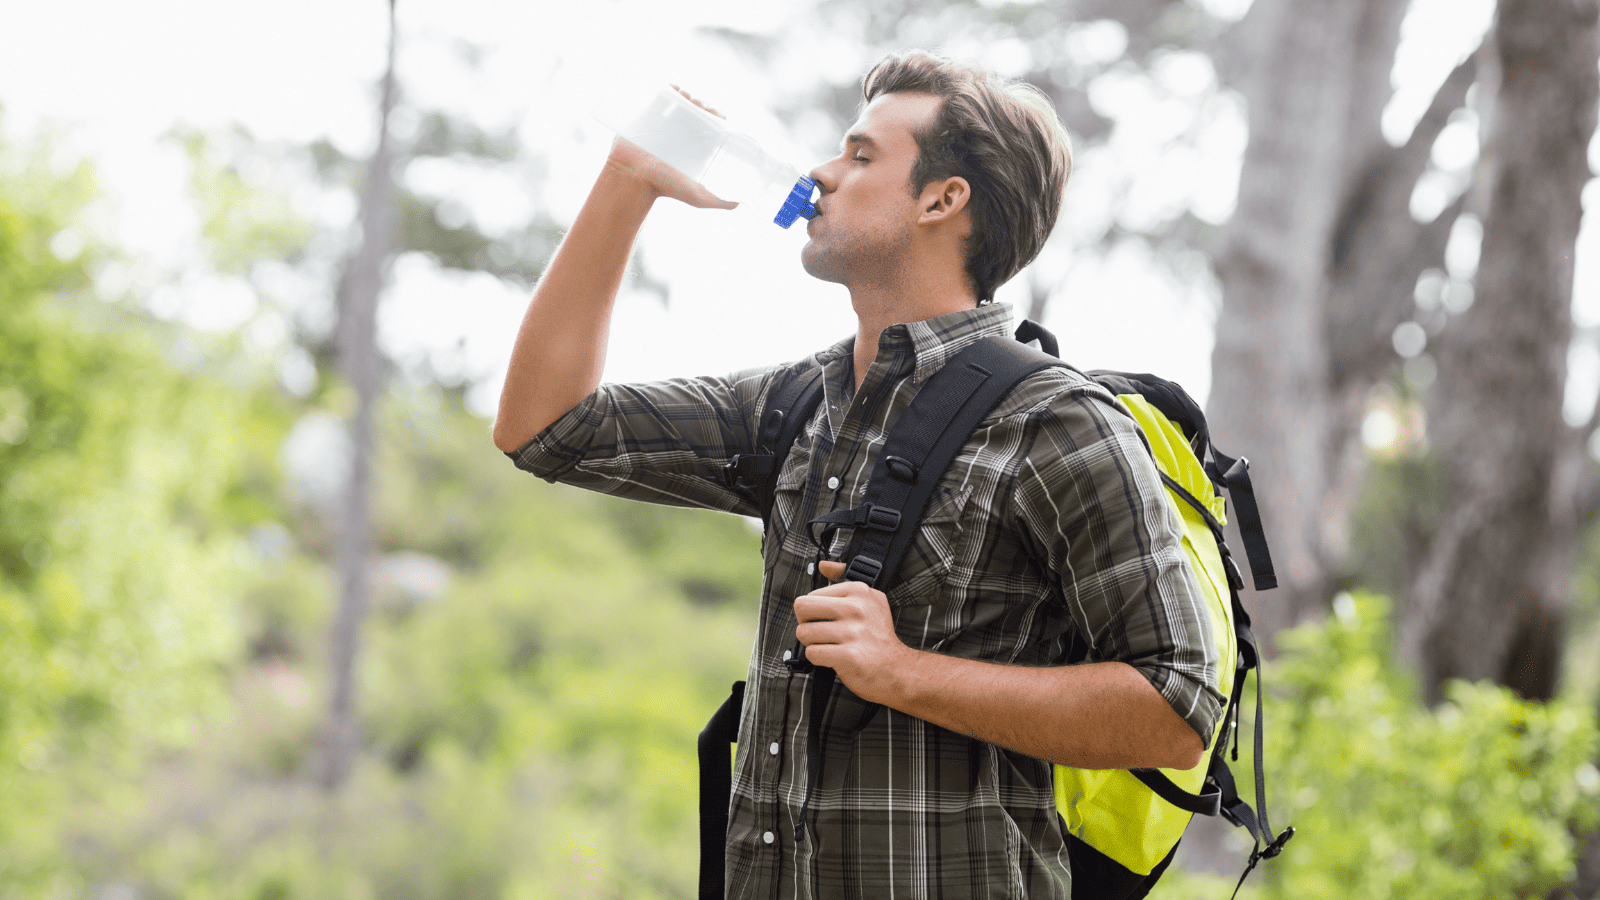 Drinking Water While Hiking